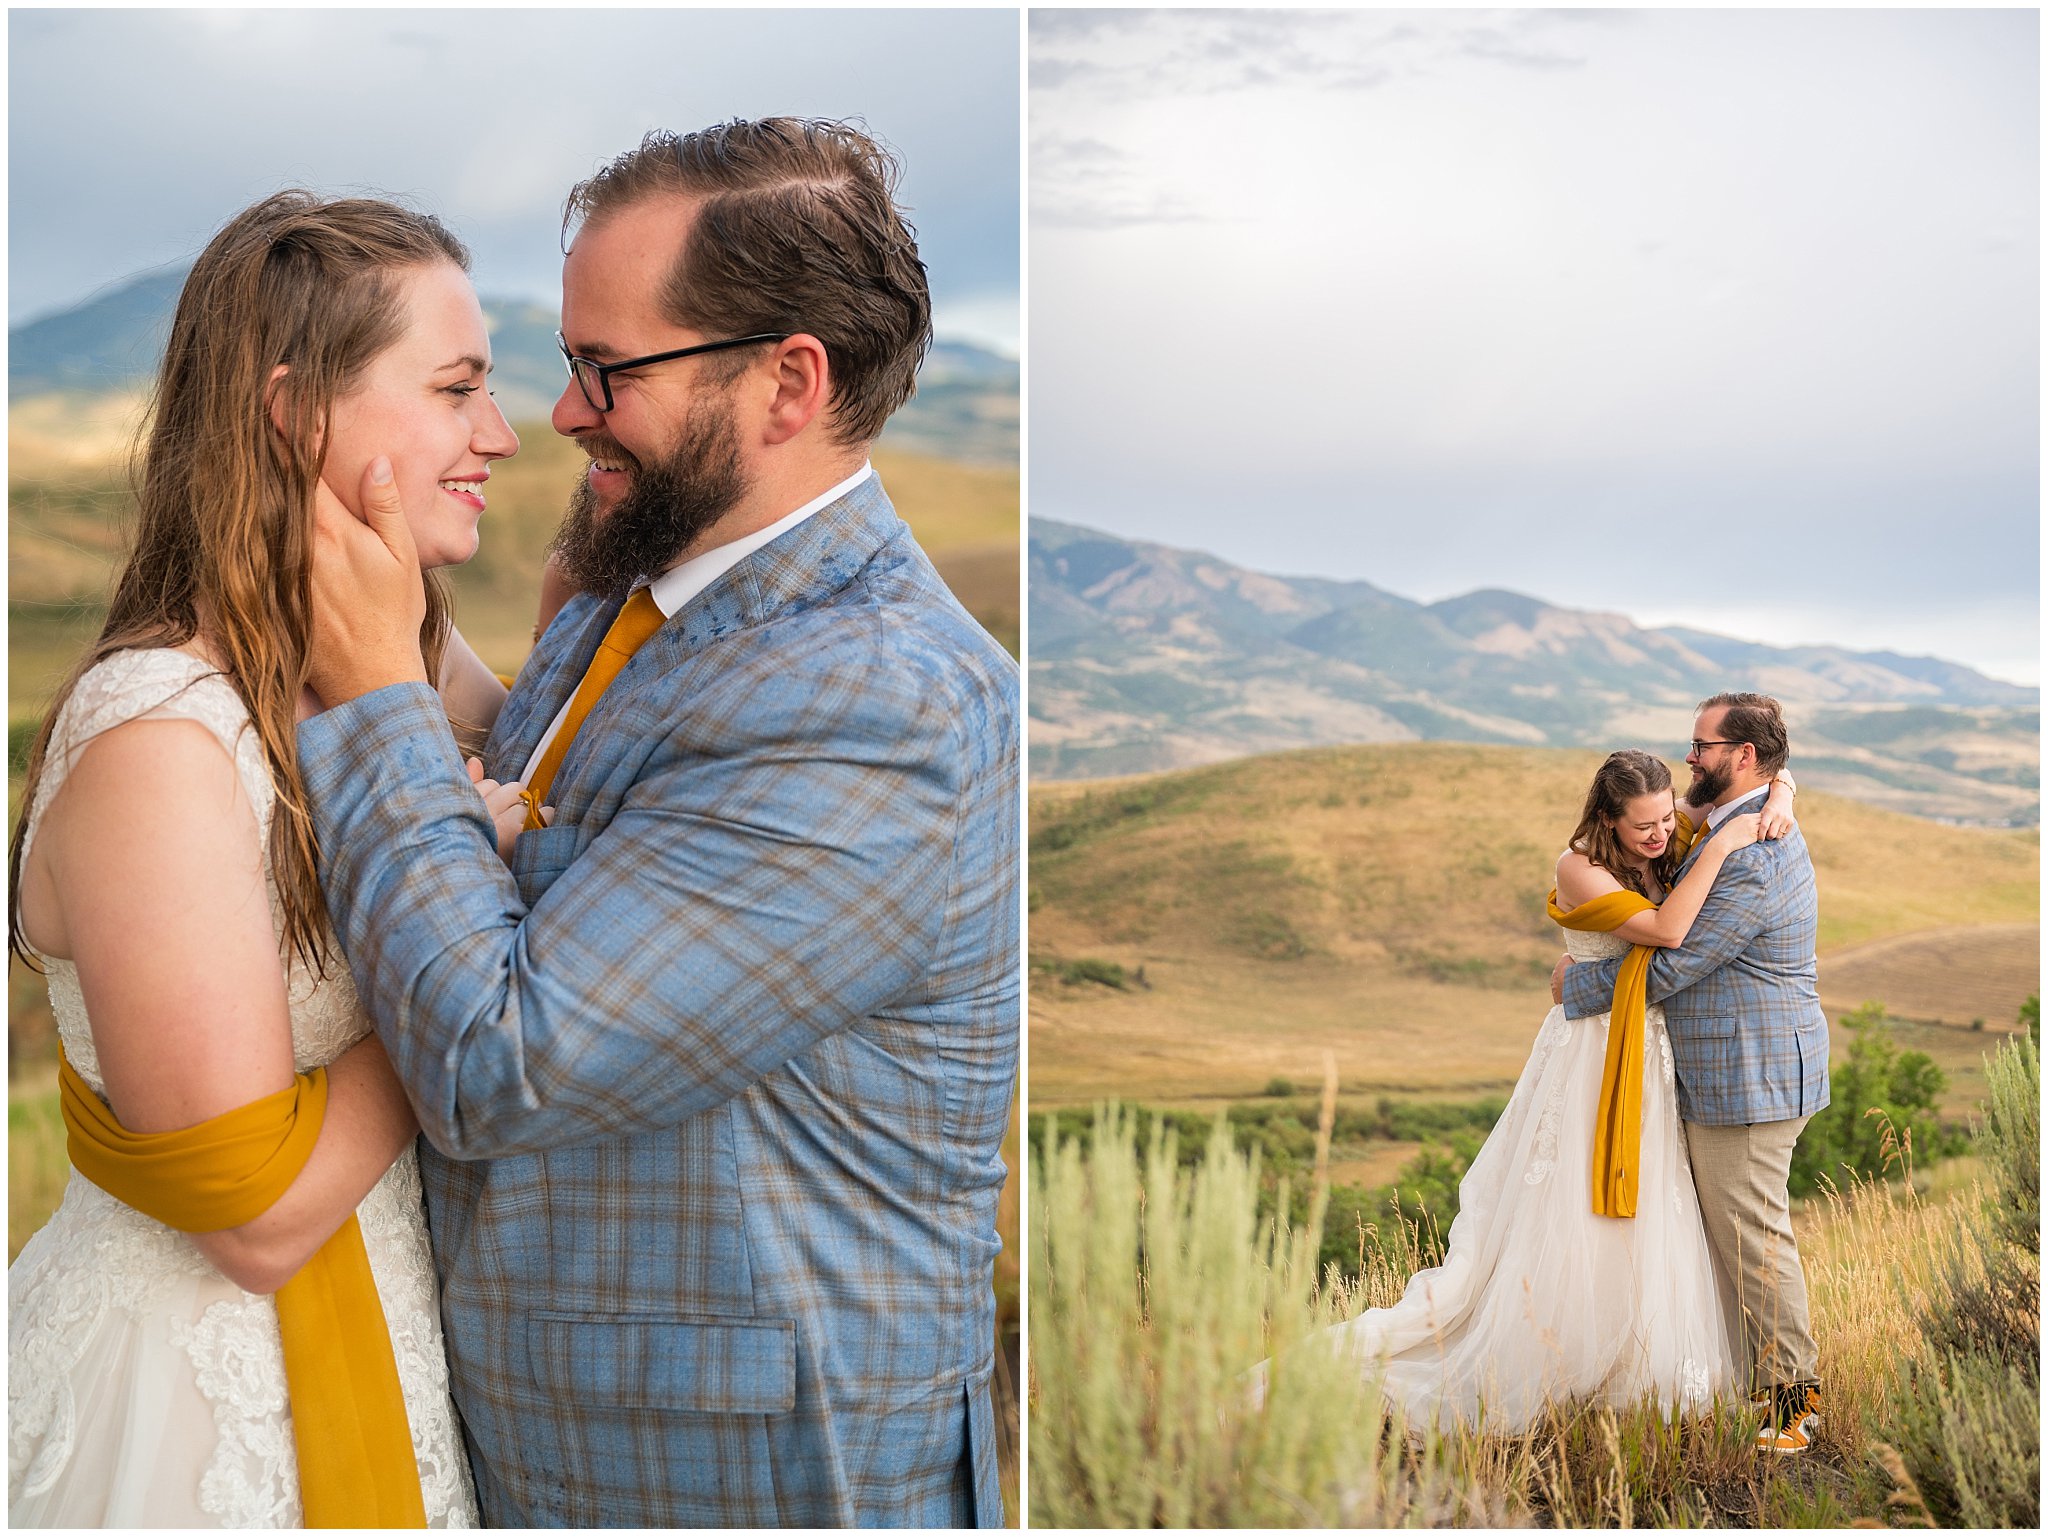 Bride and groom in flowy wedding dress and blue and gold plaid suit in the mountains surrounded by sunset skies, rainbows, and Aspen trees | Rainy Snowbasin Wedding Formal Session | Jessie and Dallin Photography